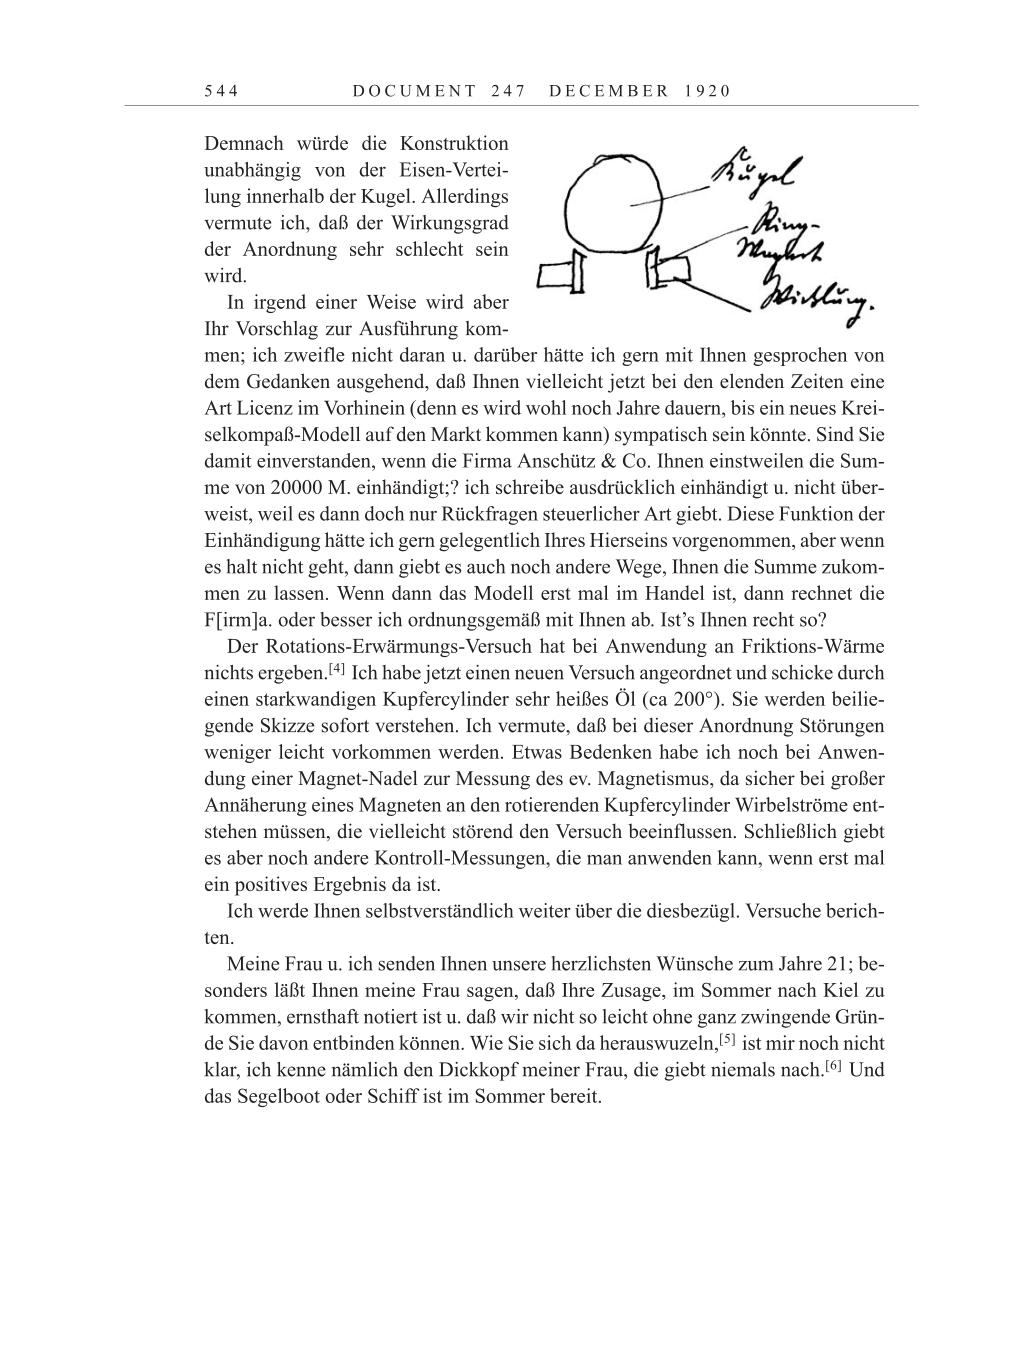 Volume 10: The Berlin Years: Correspondence May-December 1920 / Supplementary Correspondence 1909-1920 page 544